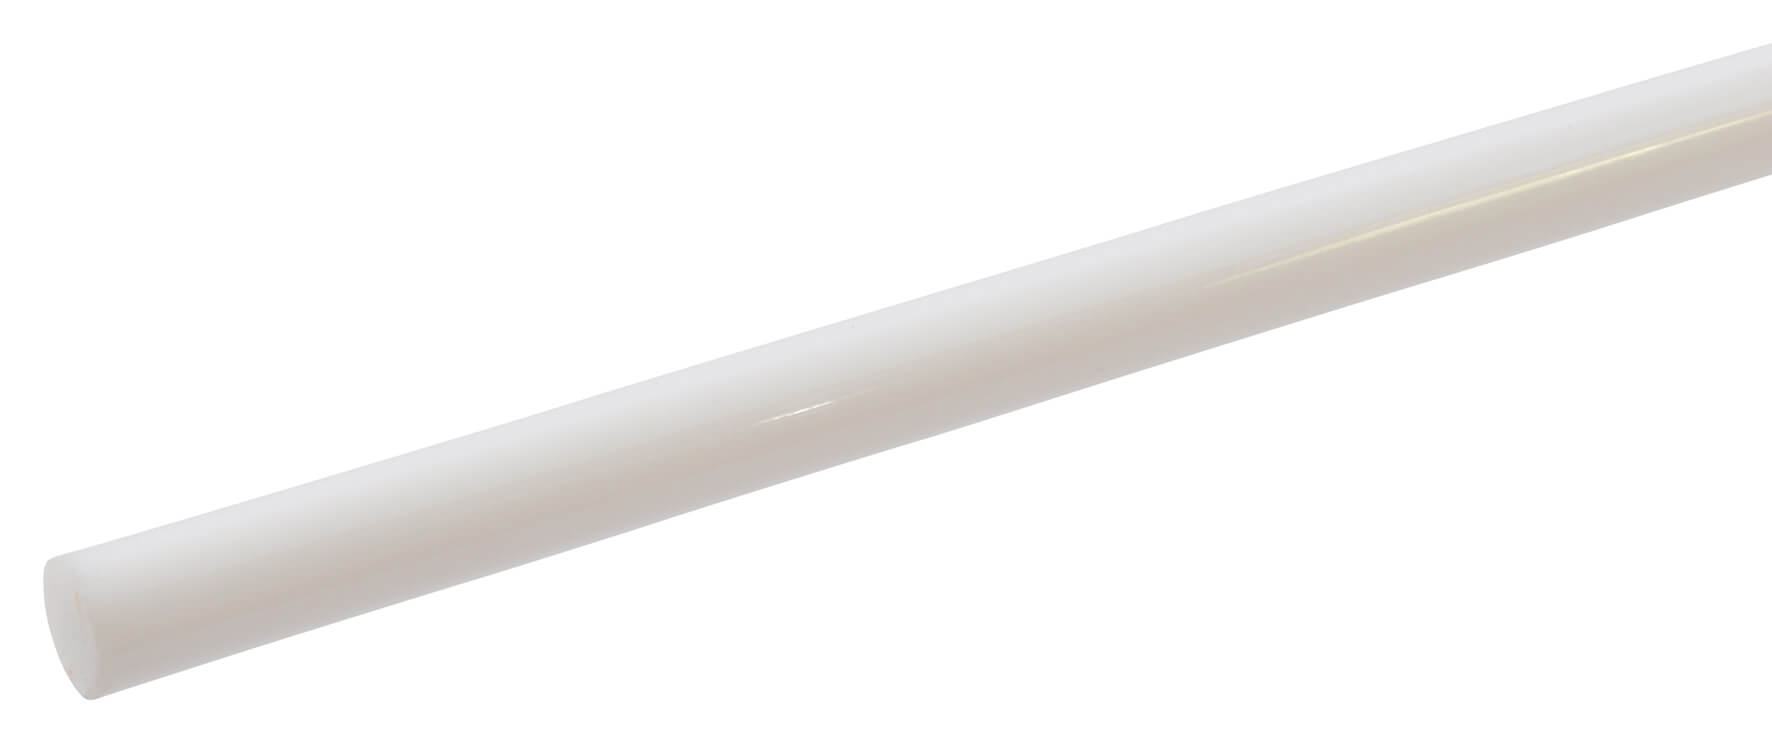 Acrylic Rod 4.8mm x 610mm - Solid White